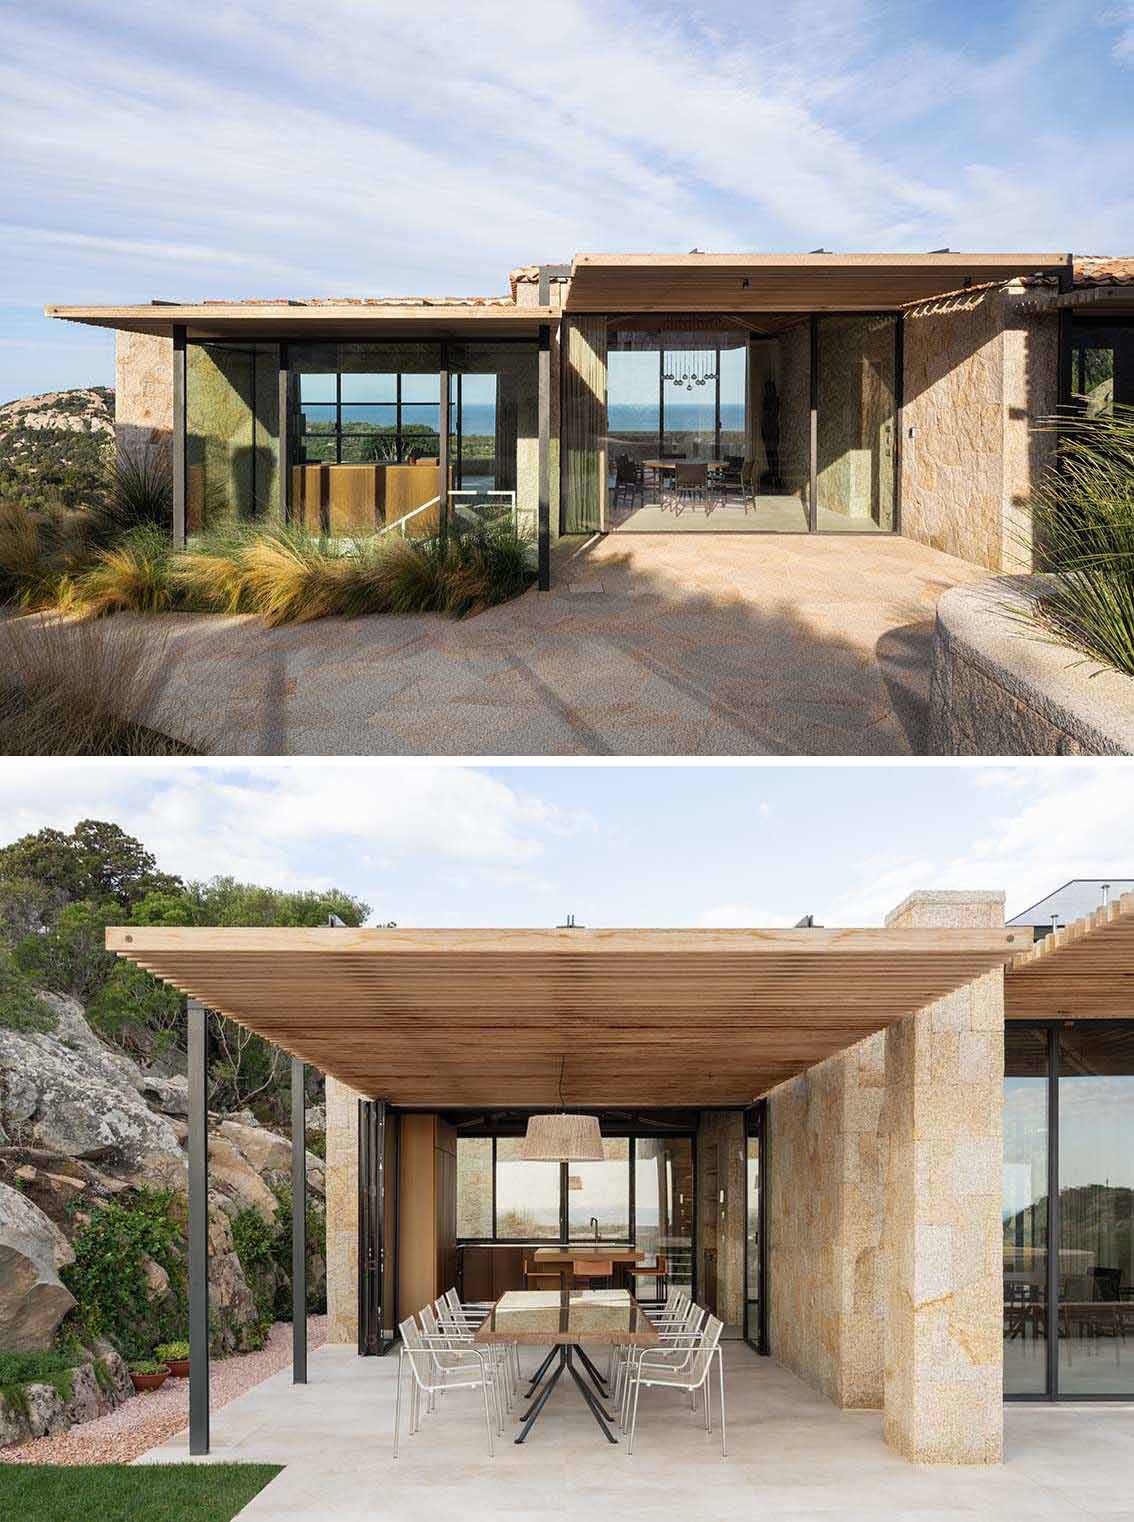 Glass walls, with some that open, connect the outdoor spaces to the interior, while at the same time, providing unobstructed water views.